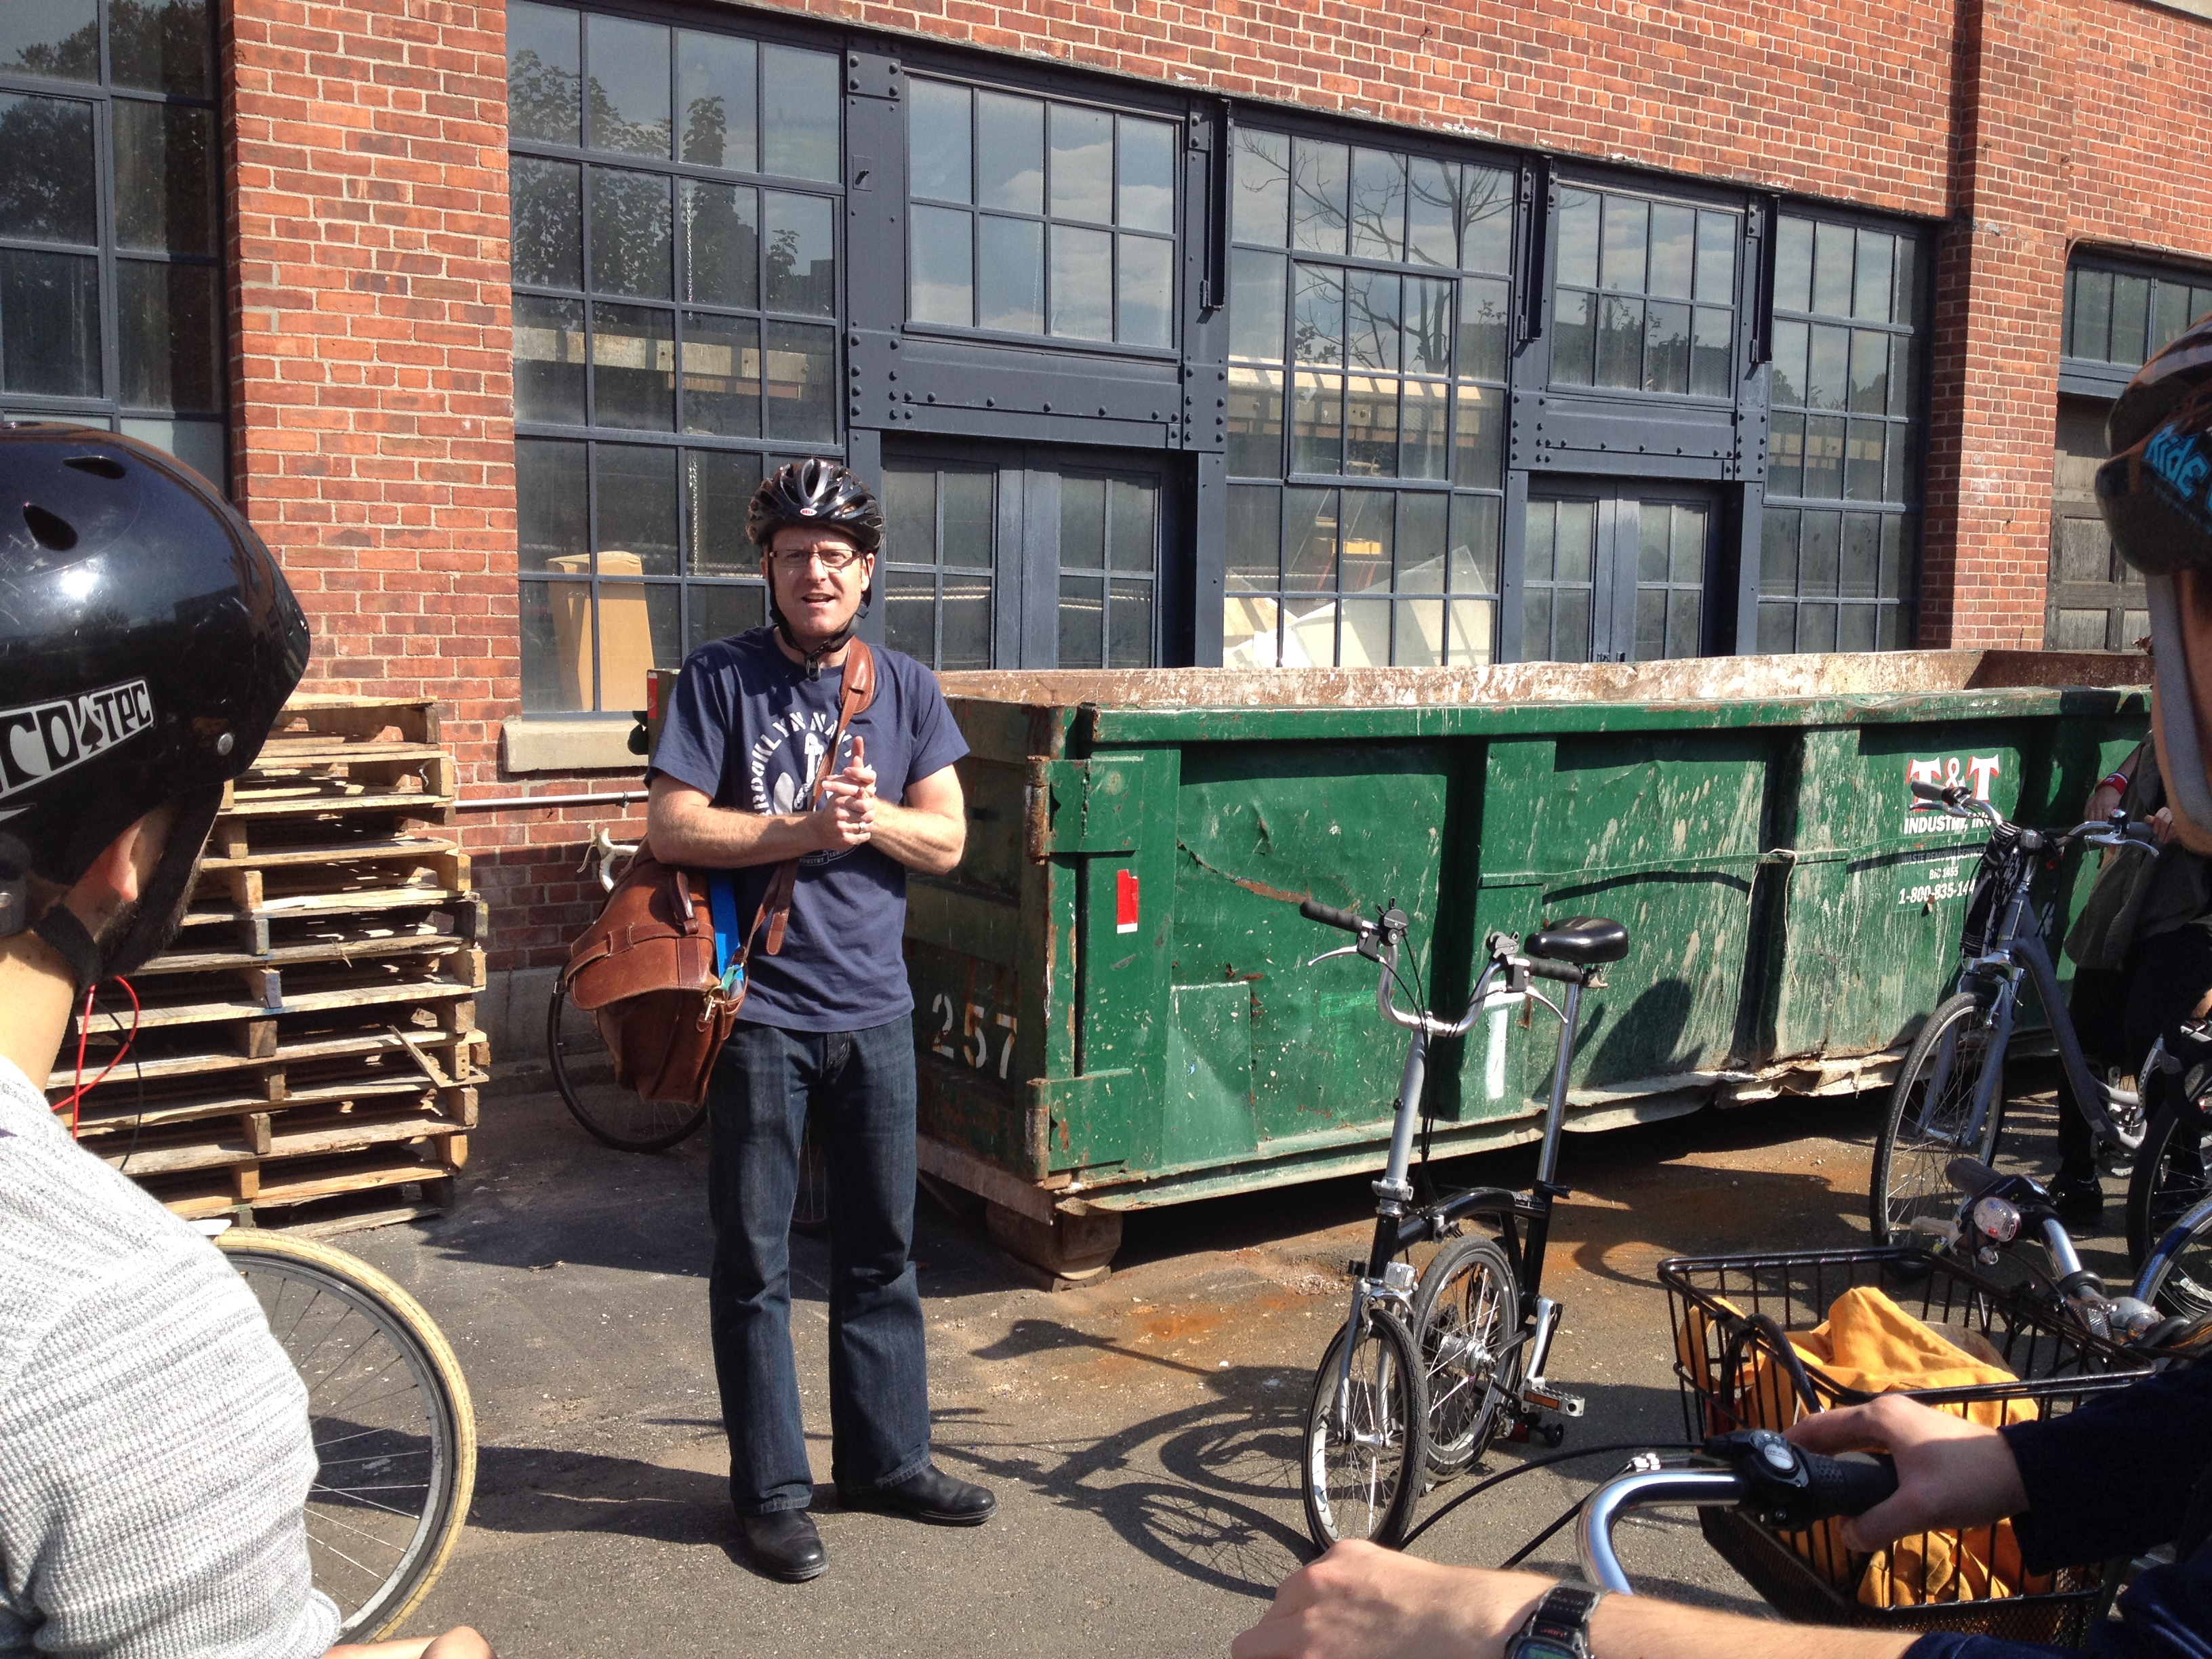 Doug Chapman standing in front of the IceStone factory and a dumpster addressing a tour group on a bicycle tour.